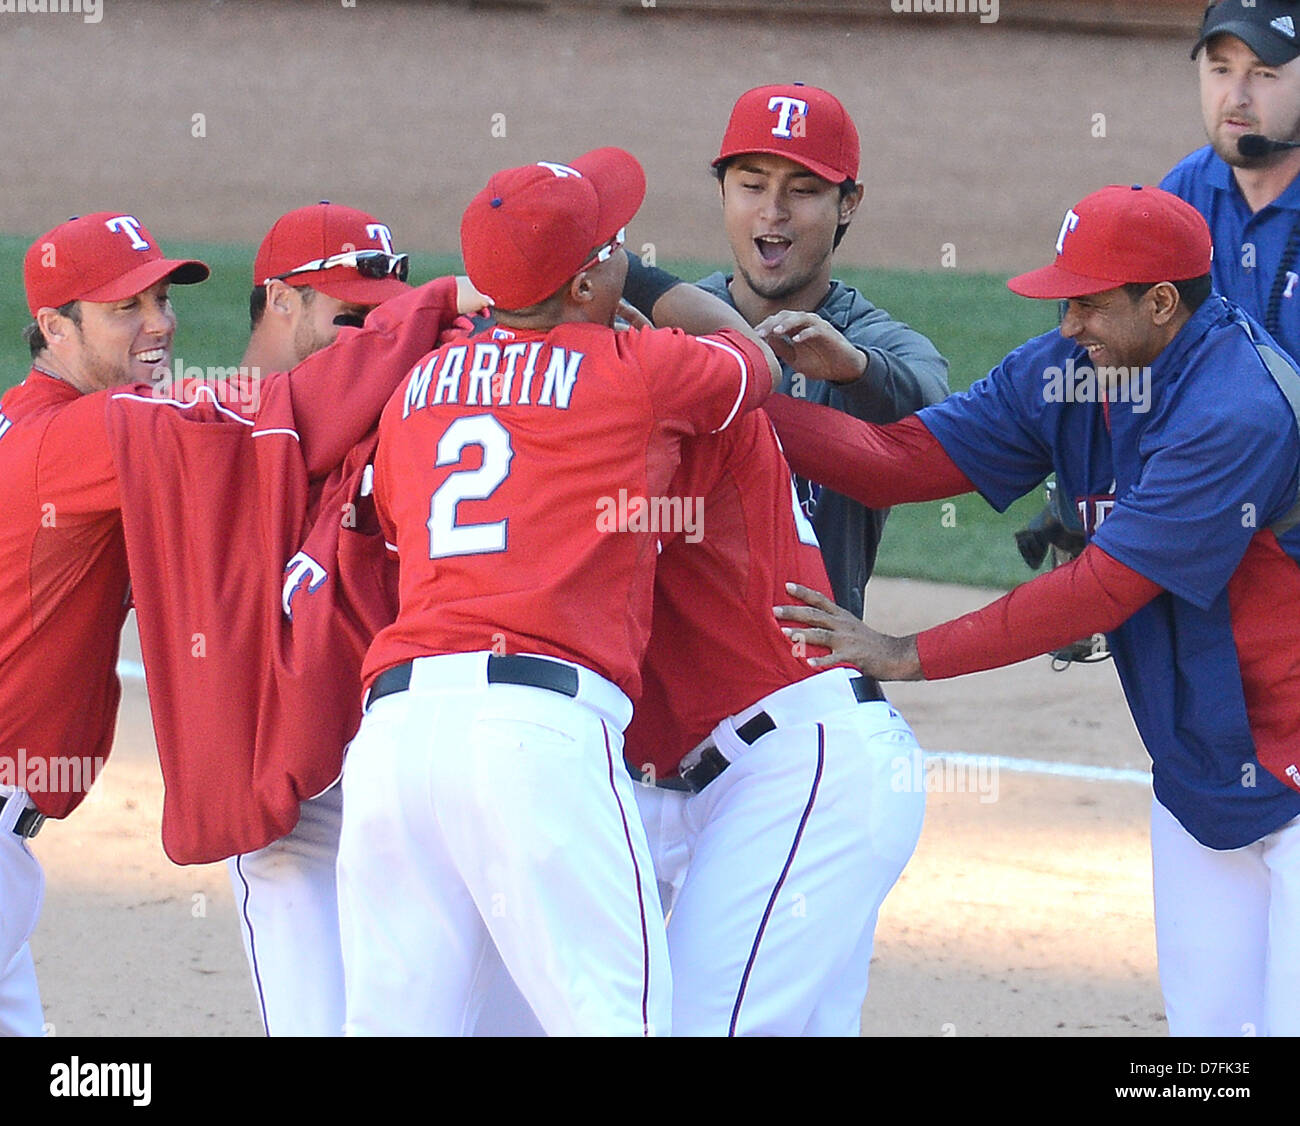 Arlington, Texas, USA. 5th May 2013. Texas Rangers team group, MAY 5, 2013 - MLB : Adrian Beltre of the Texas Rangers celebrates with his teammates including Yu Darvish after hitting a walk off single in the ninth inning during the baseball game against the Boston Red Sox at Rangers Ballpark in Arlington in Arlington, Texas, United States. (Photo by AFLO/Alamy Live News) Stock Photo